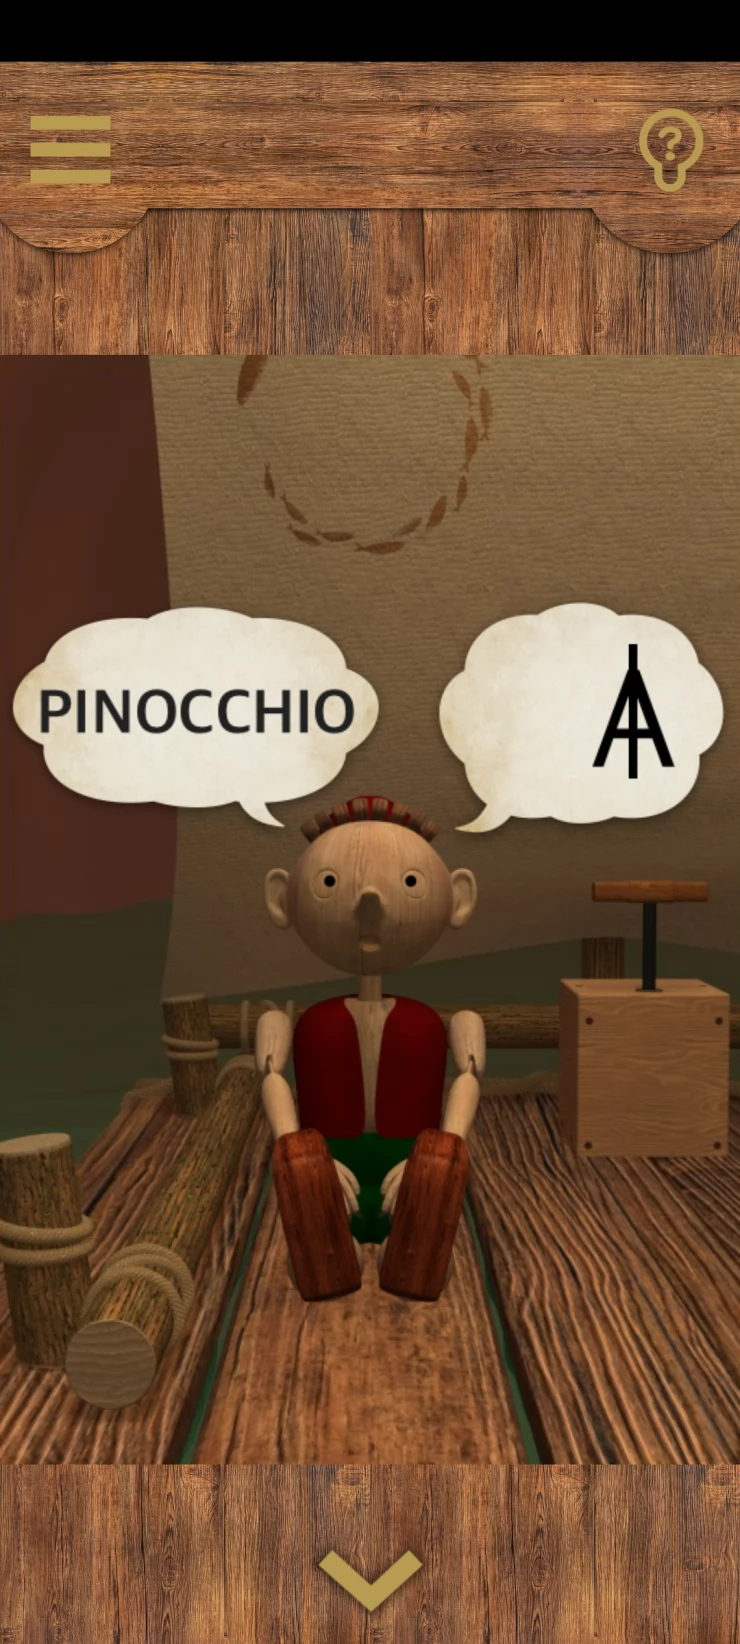 Room Escape Game - Pinocchio Walkthrough Completed - Spoiler Free